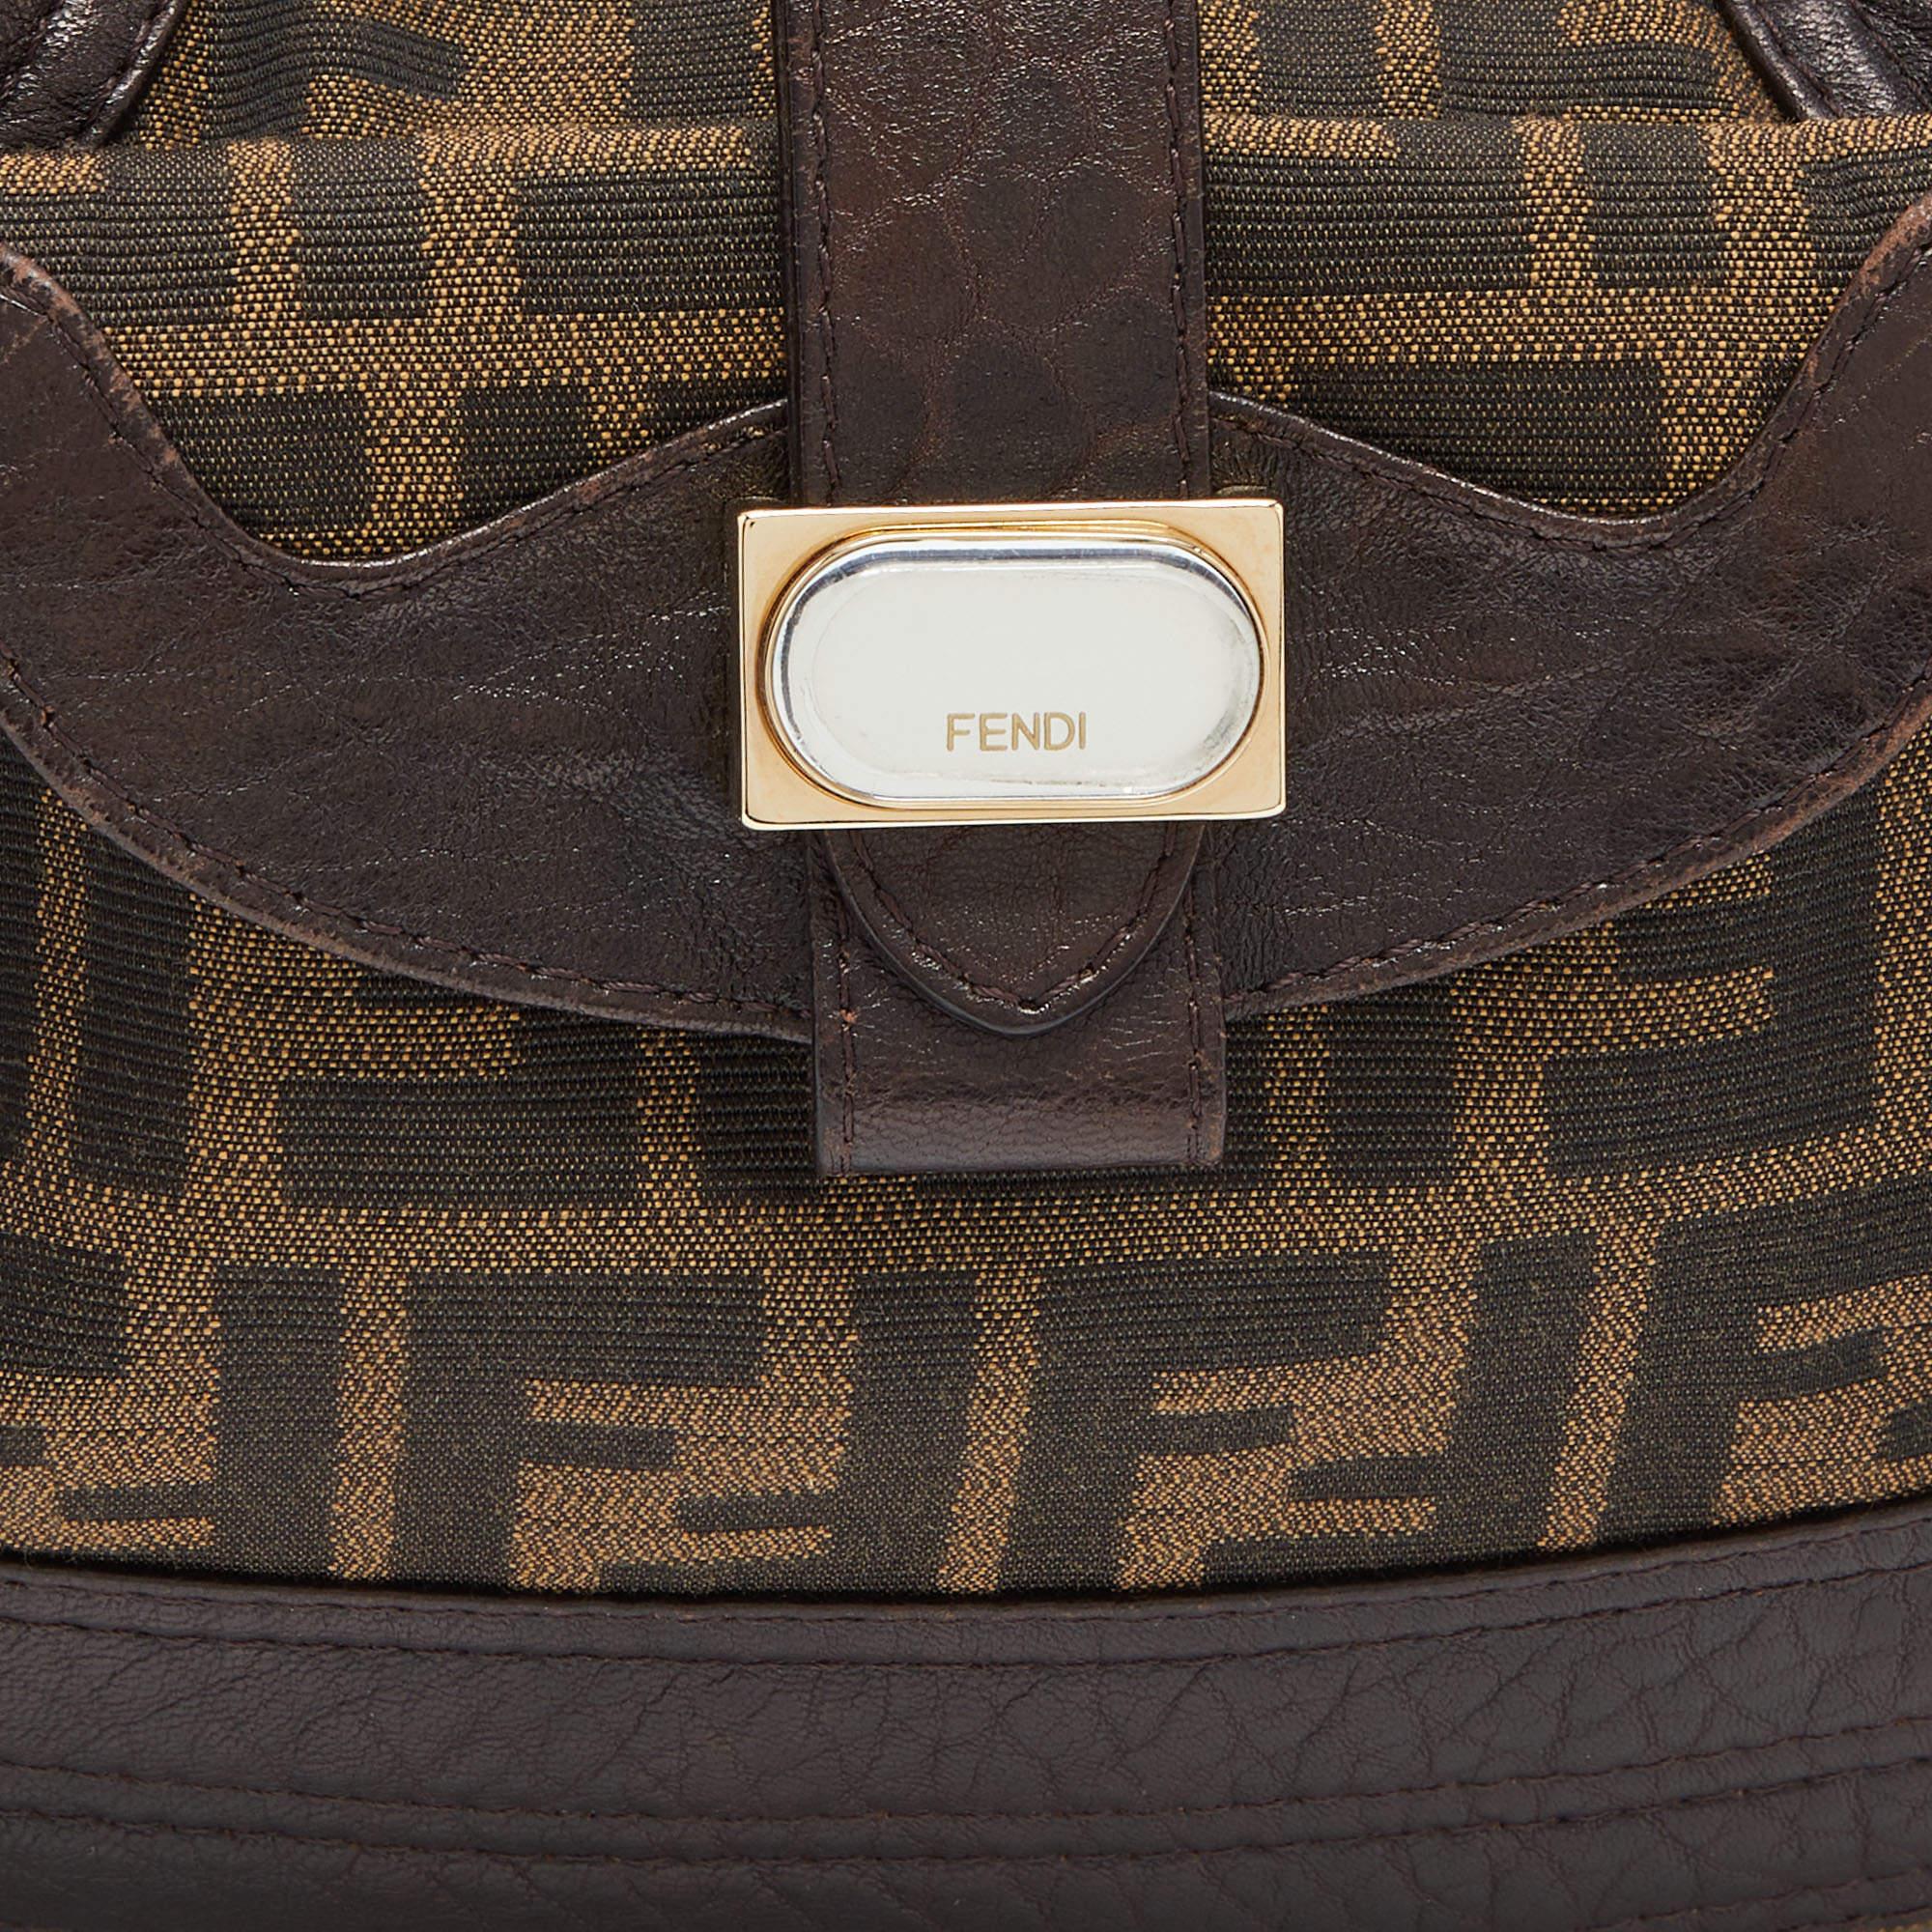 Fendi Brown Zucca Canvas and Leather Spy Hobo Bag 6